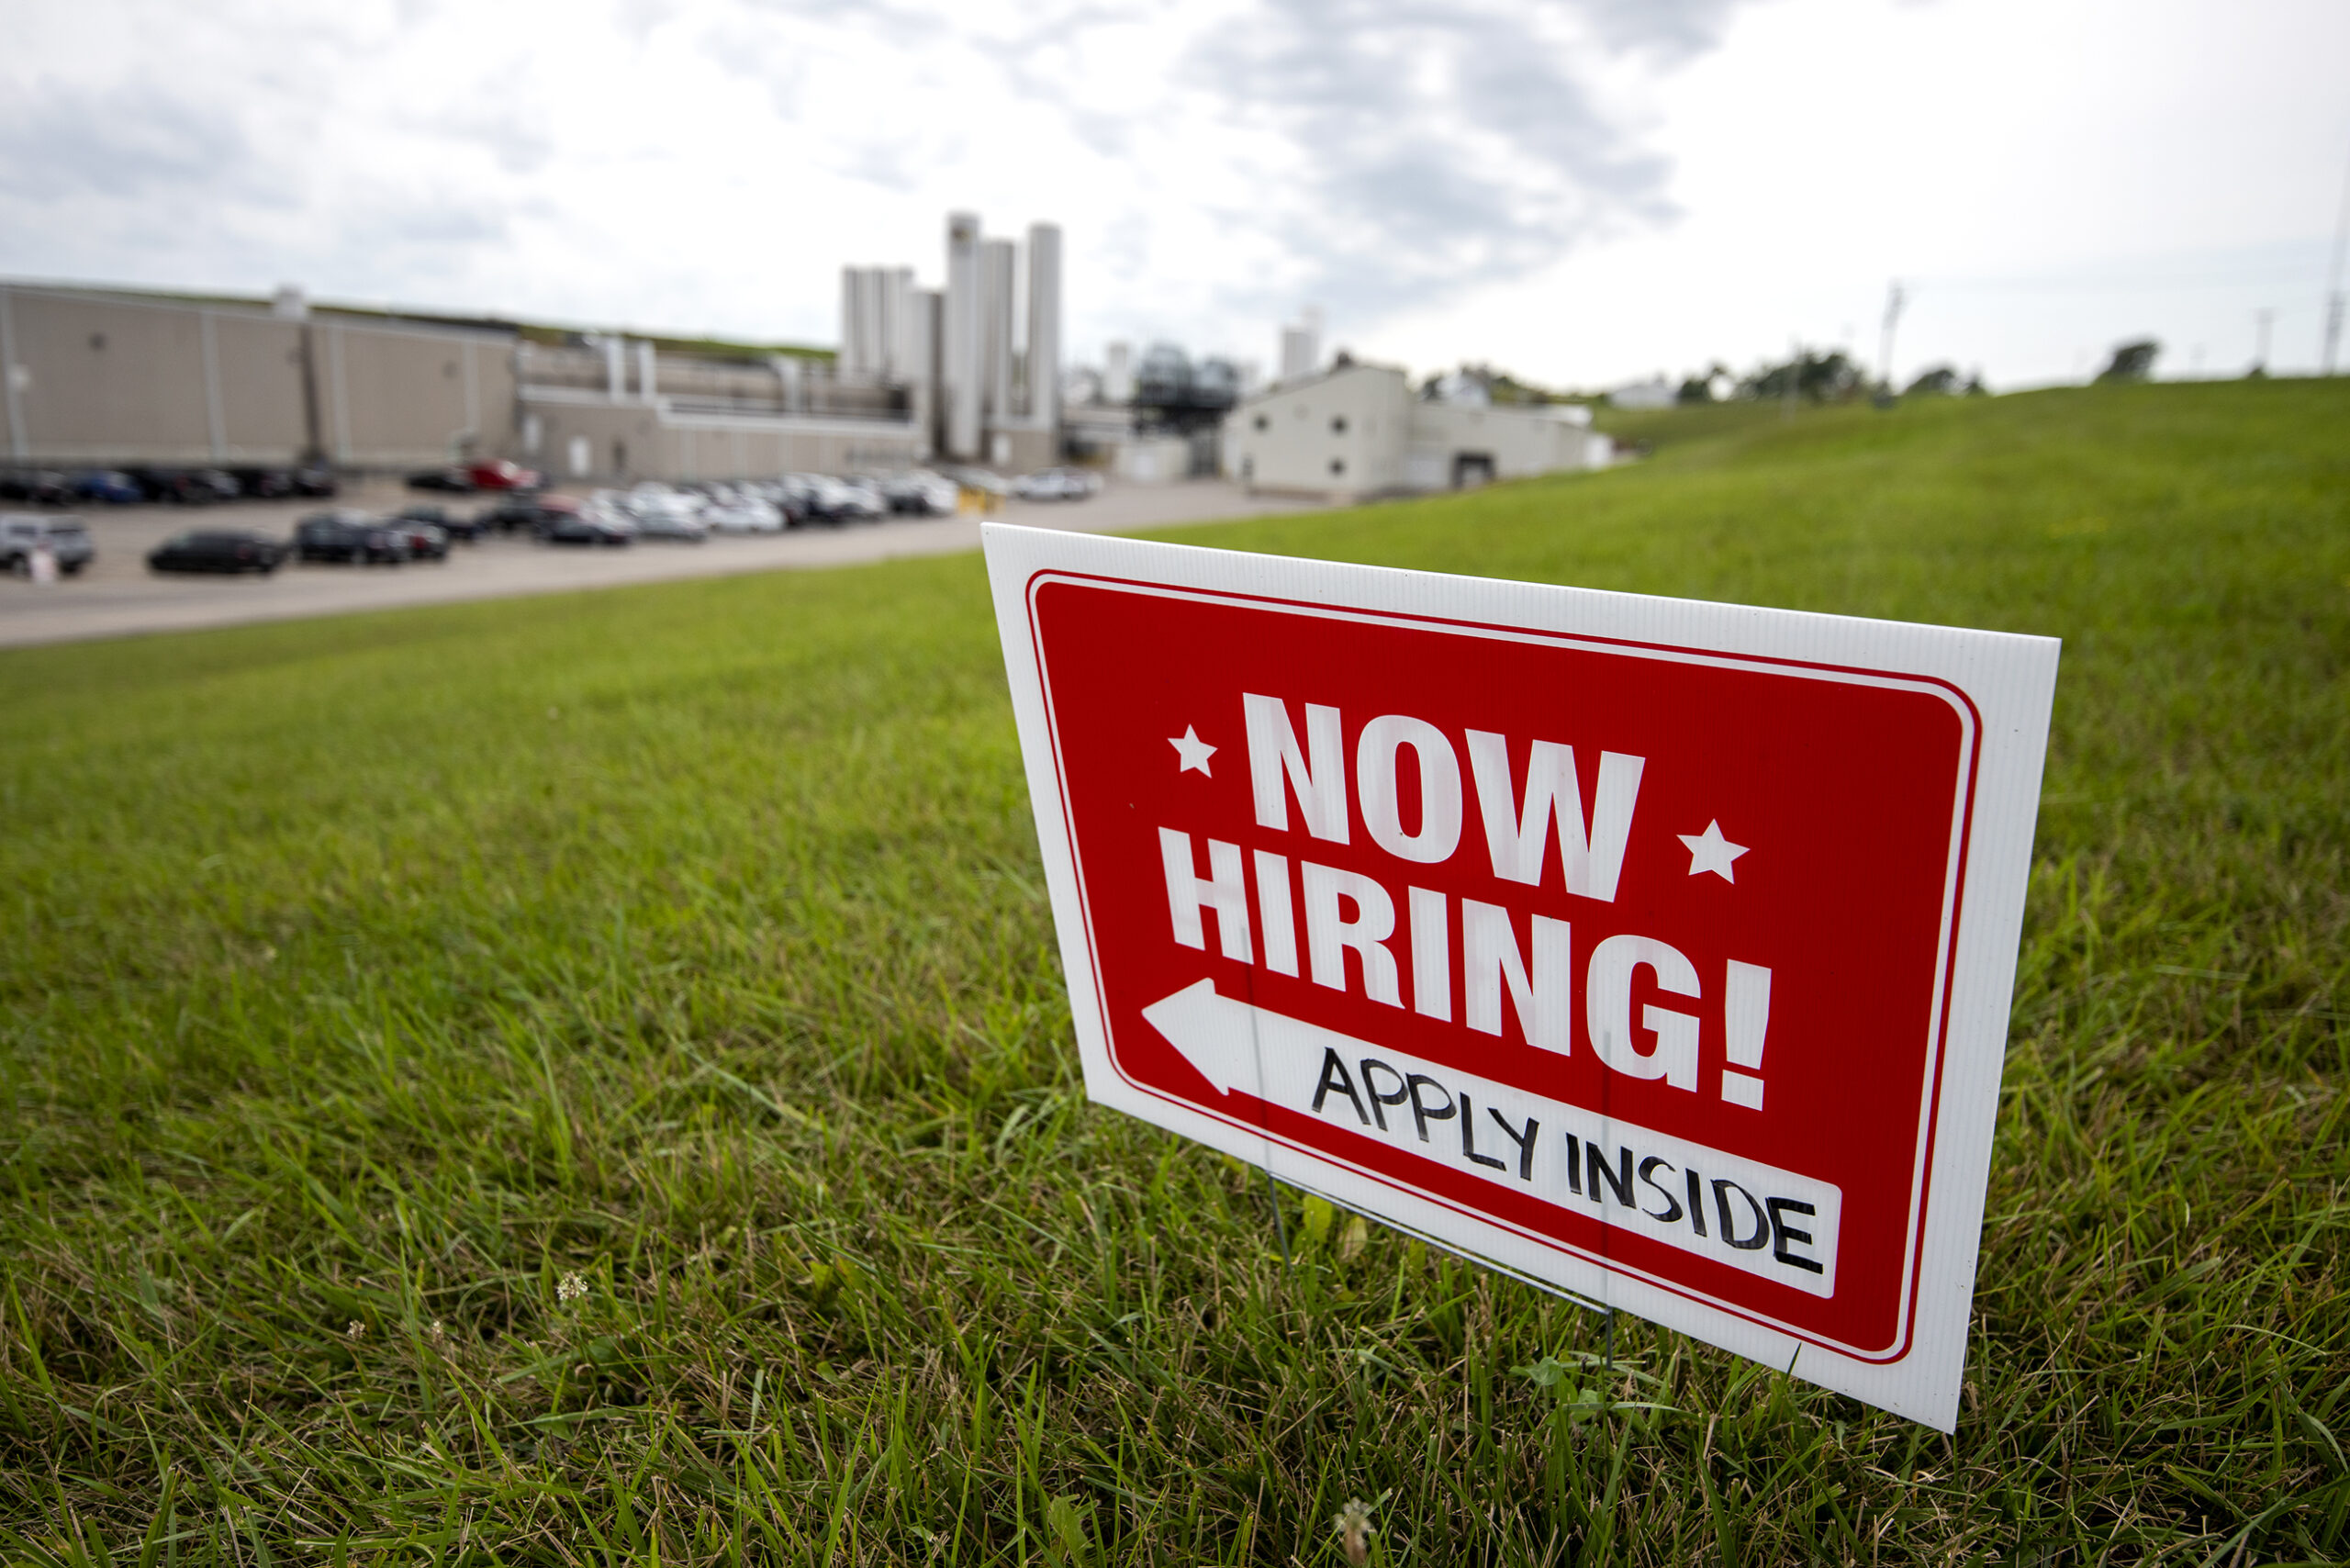 A red "Now Hiring!" sign located in a grassy field near a county road instructs potential applicants to apply outside.